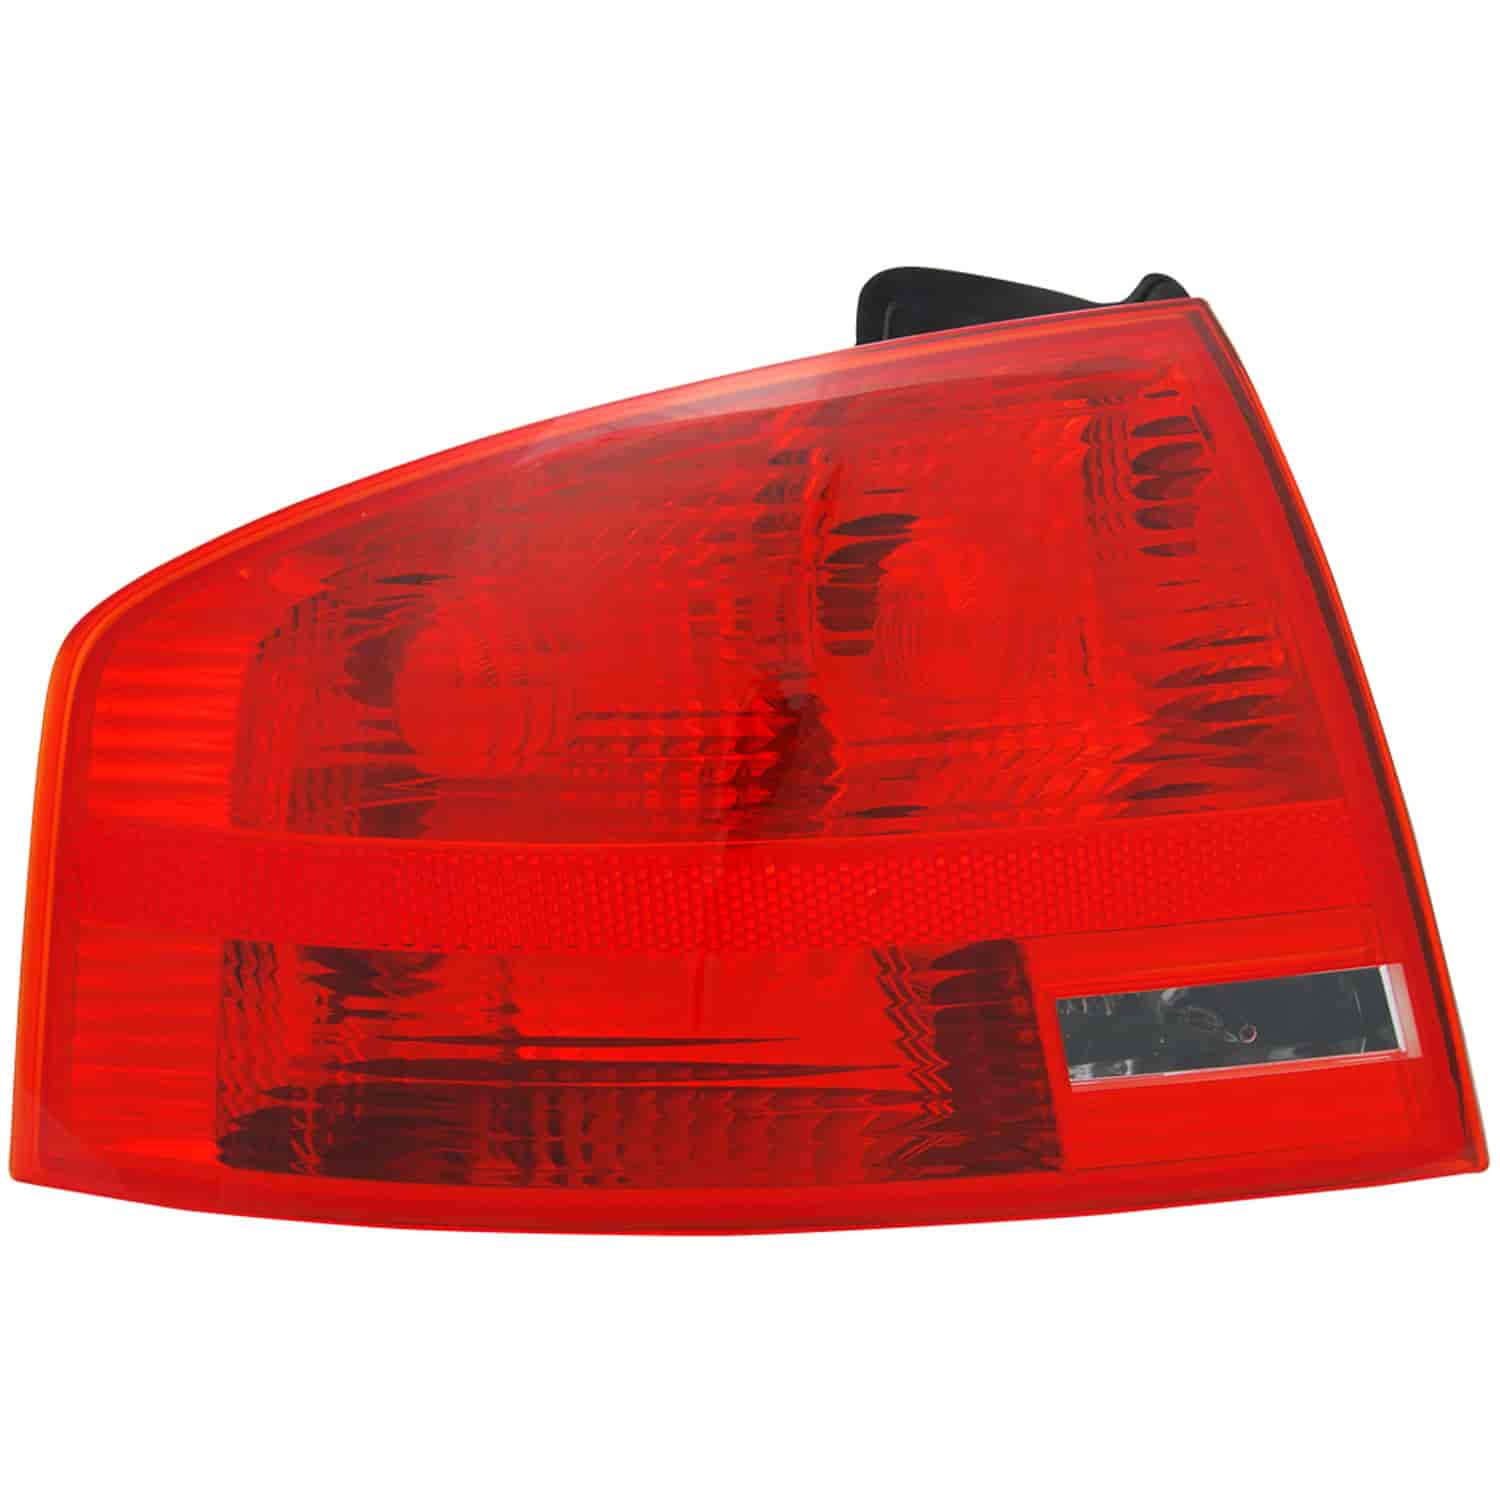 Tail Lamp Assembly for 2005-2008 Audi [Left/Driver Side Rear]